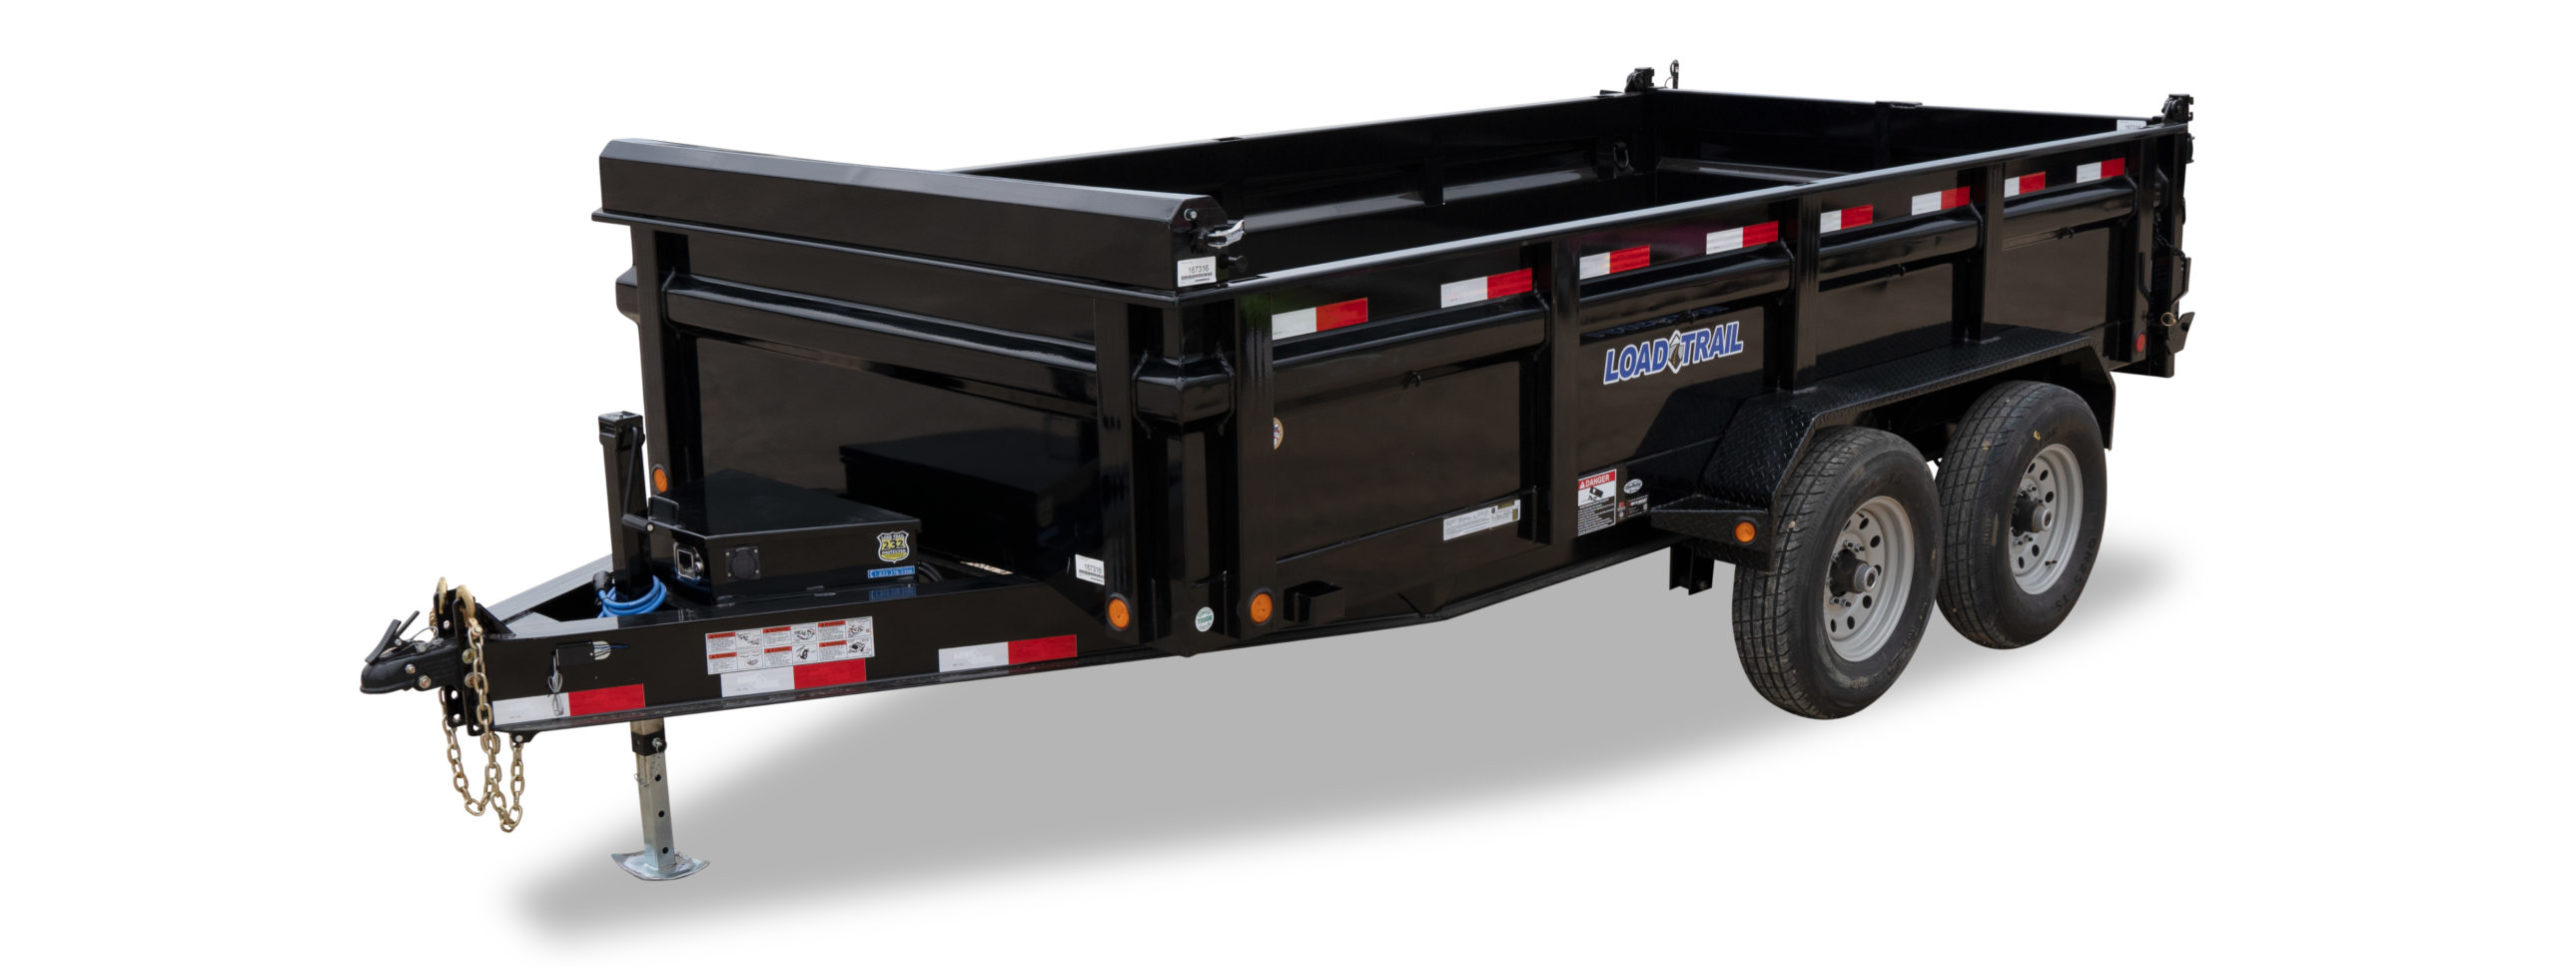 Value-driven, high-quality enclosed cargo utility trailers - LOOK Trailers